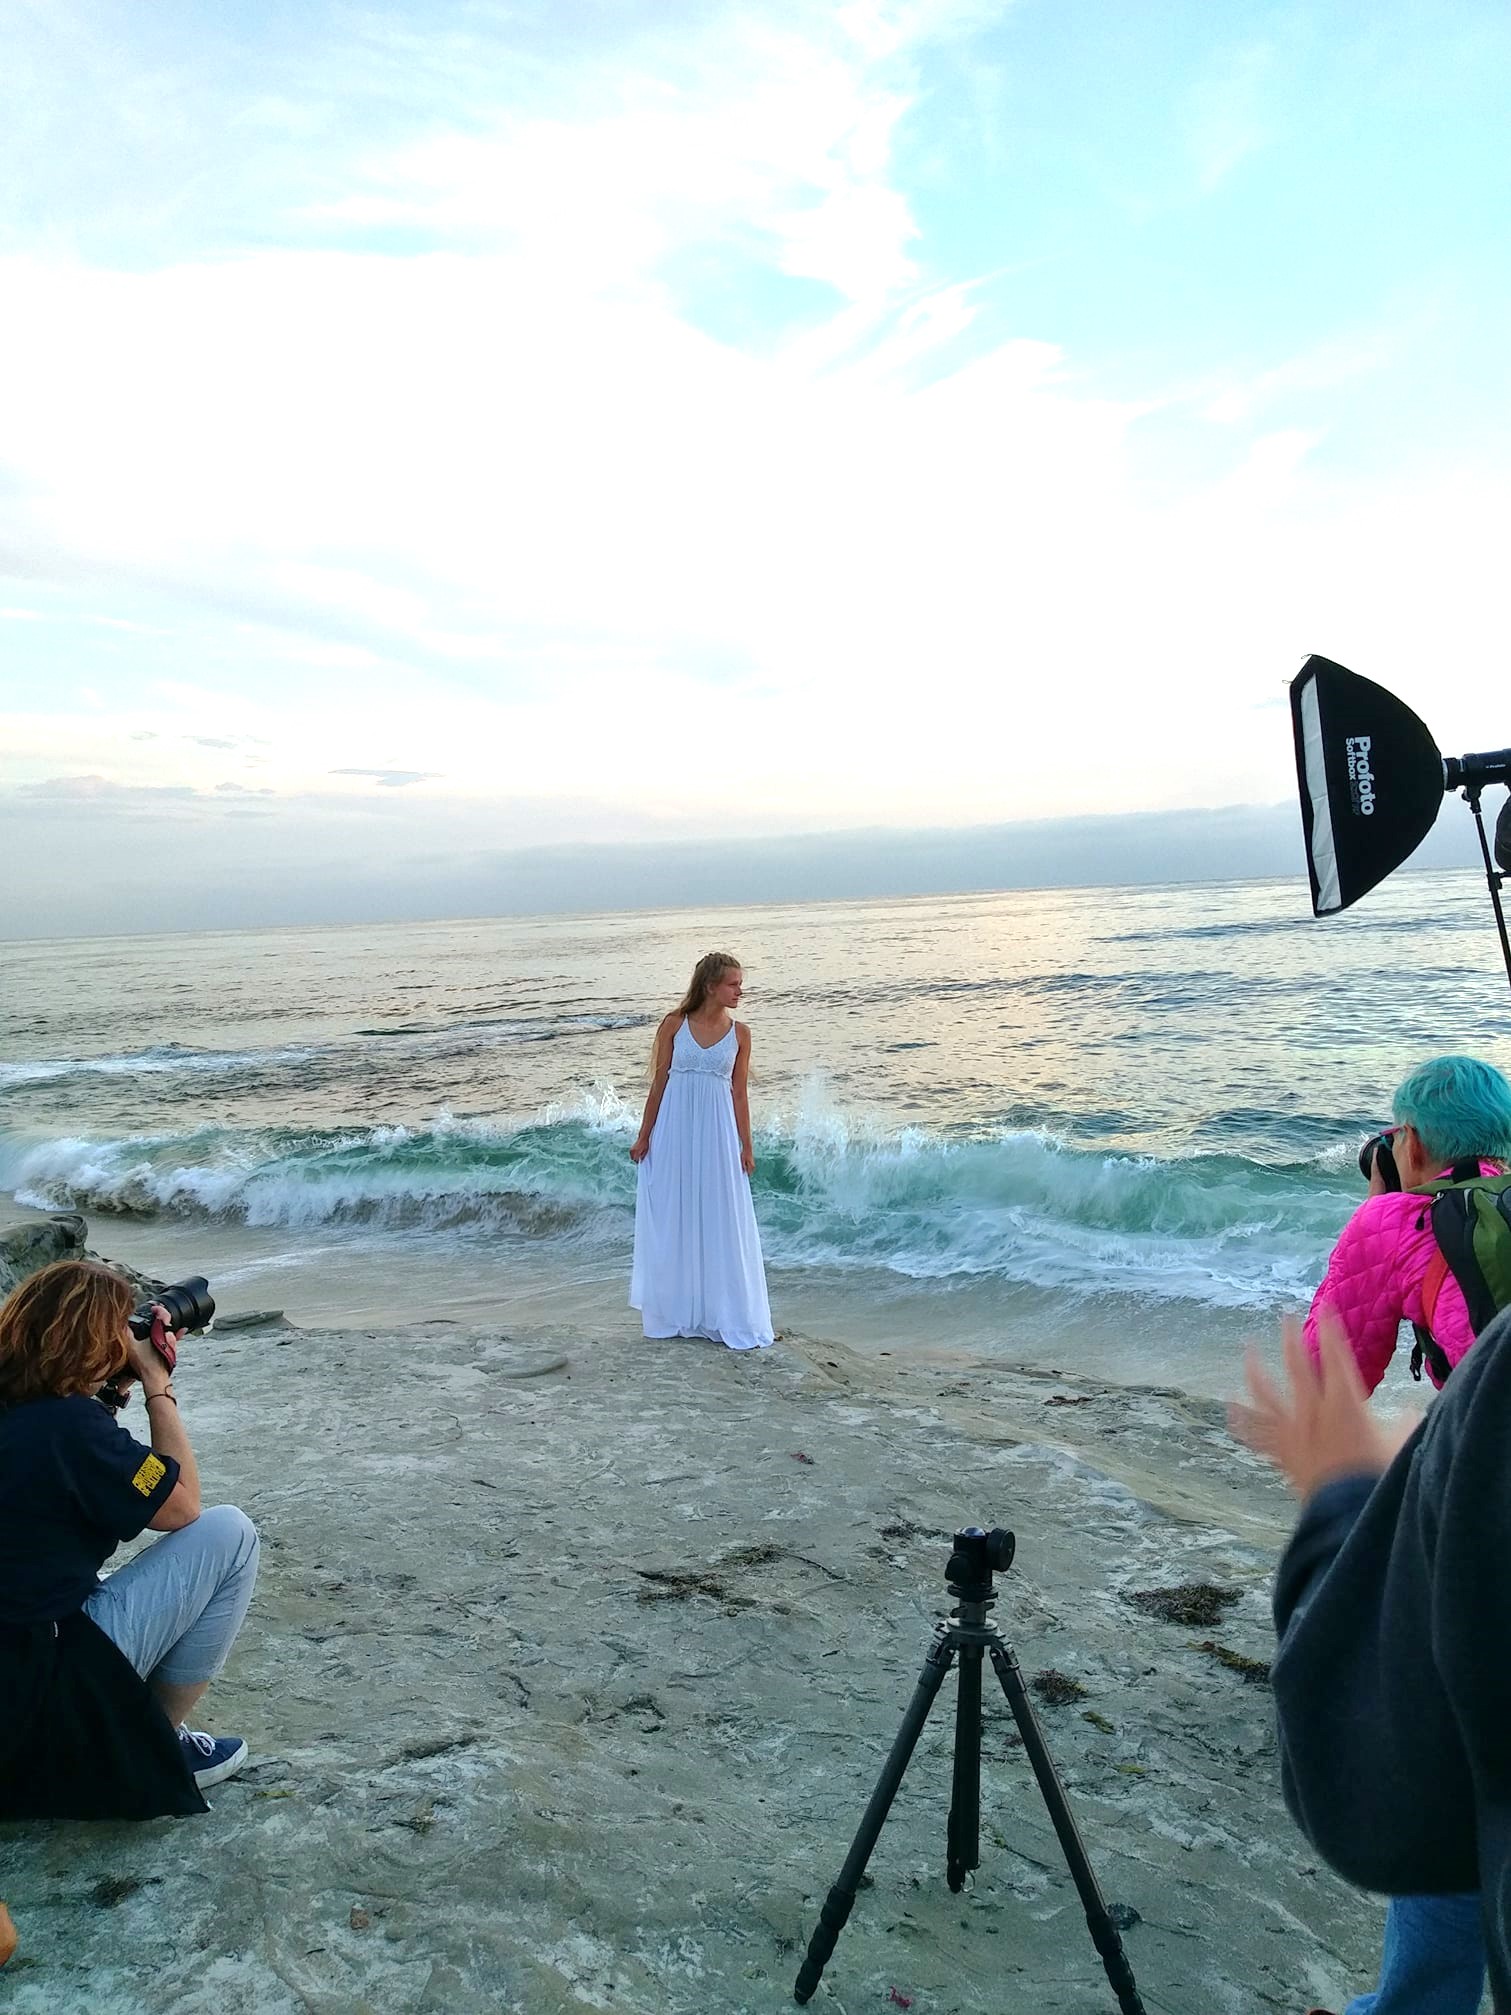 West Coast Schools Photography workshop at the beach with model in white dress.